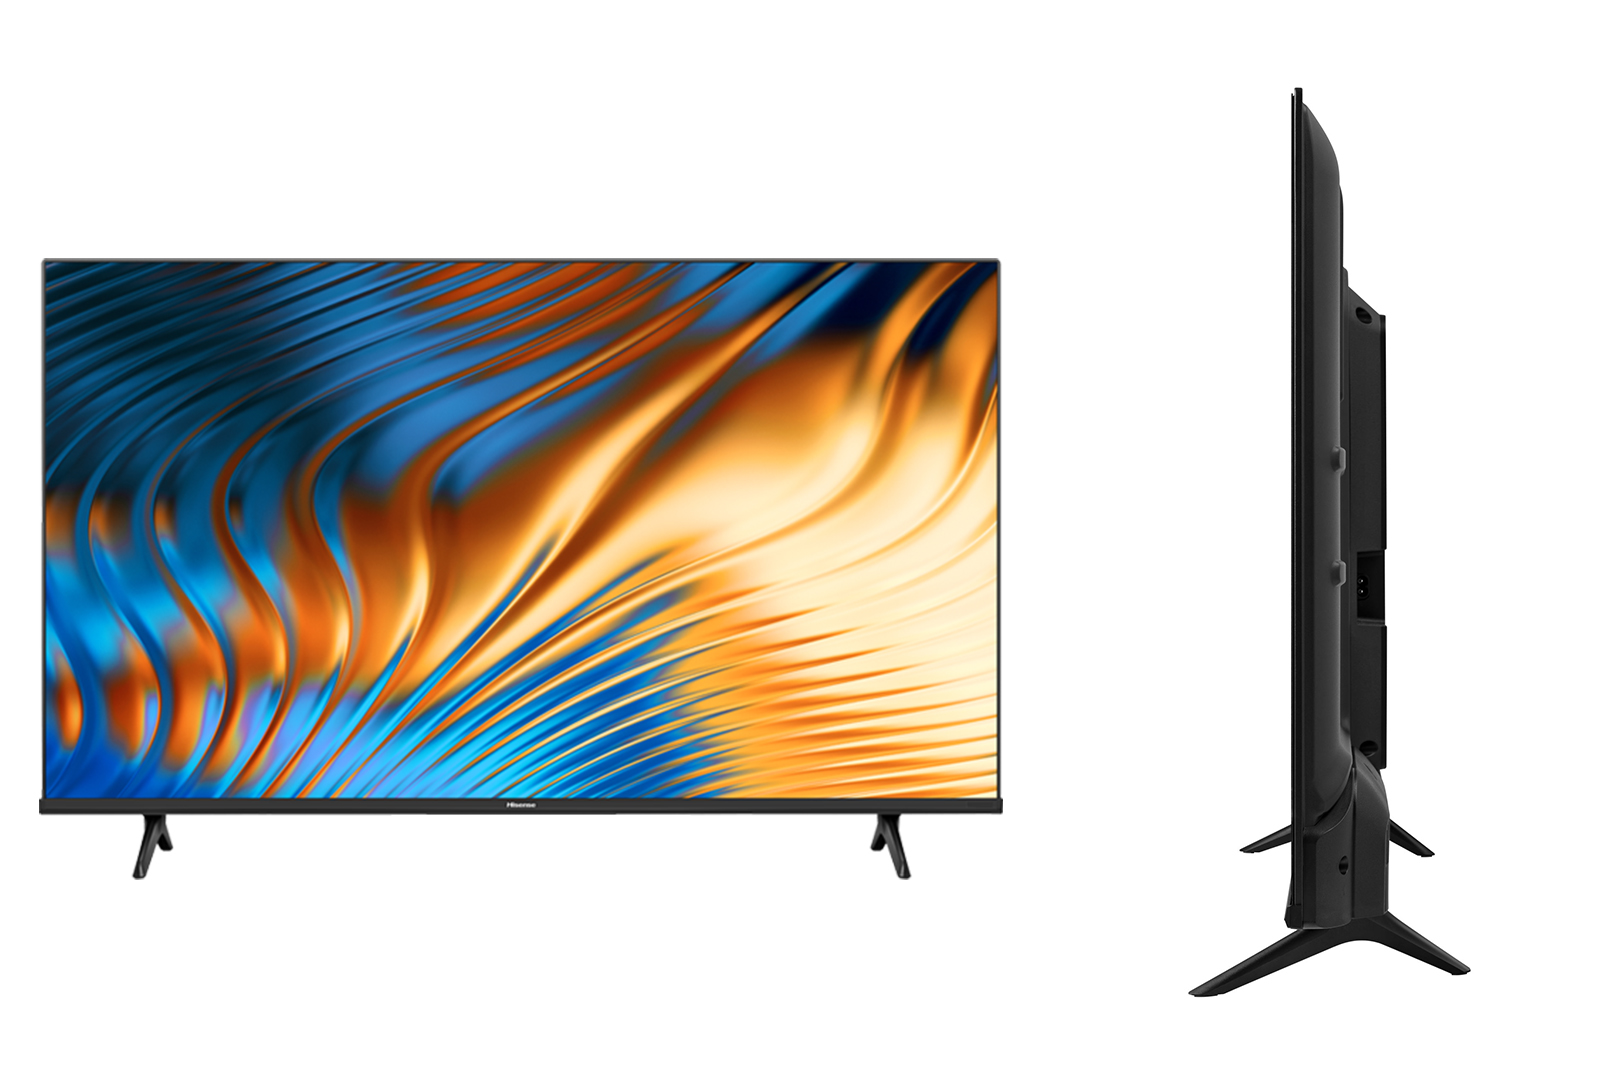 Hisense Launches A6100h 4k Smart Tv Series Starts From Rm1499